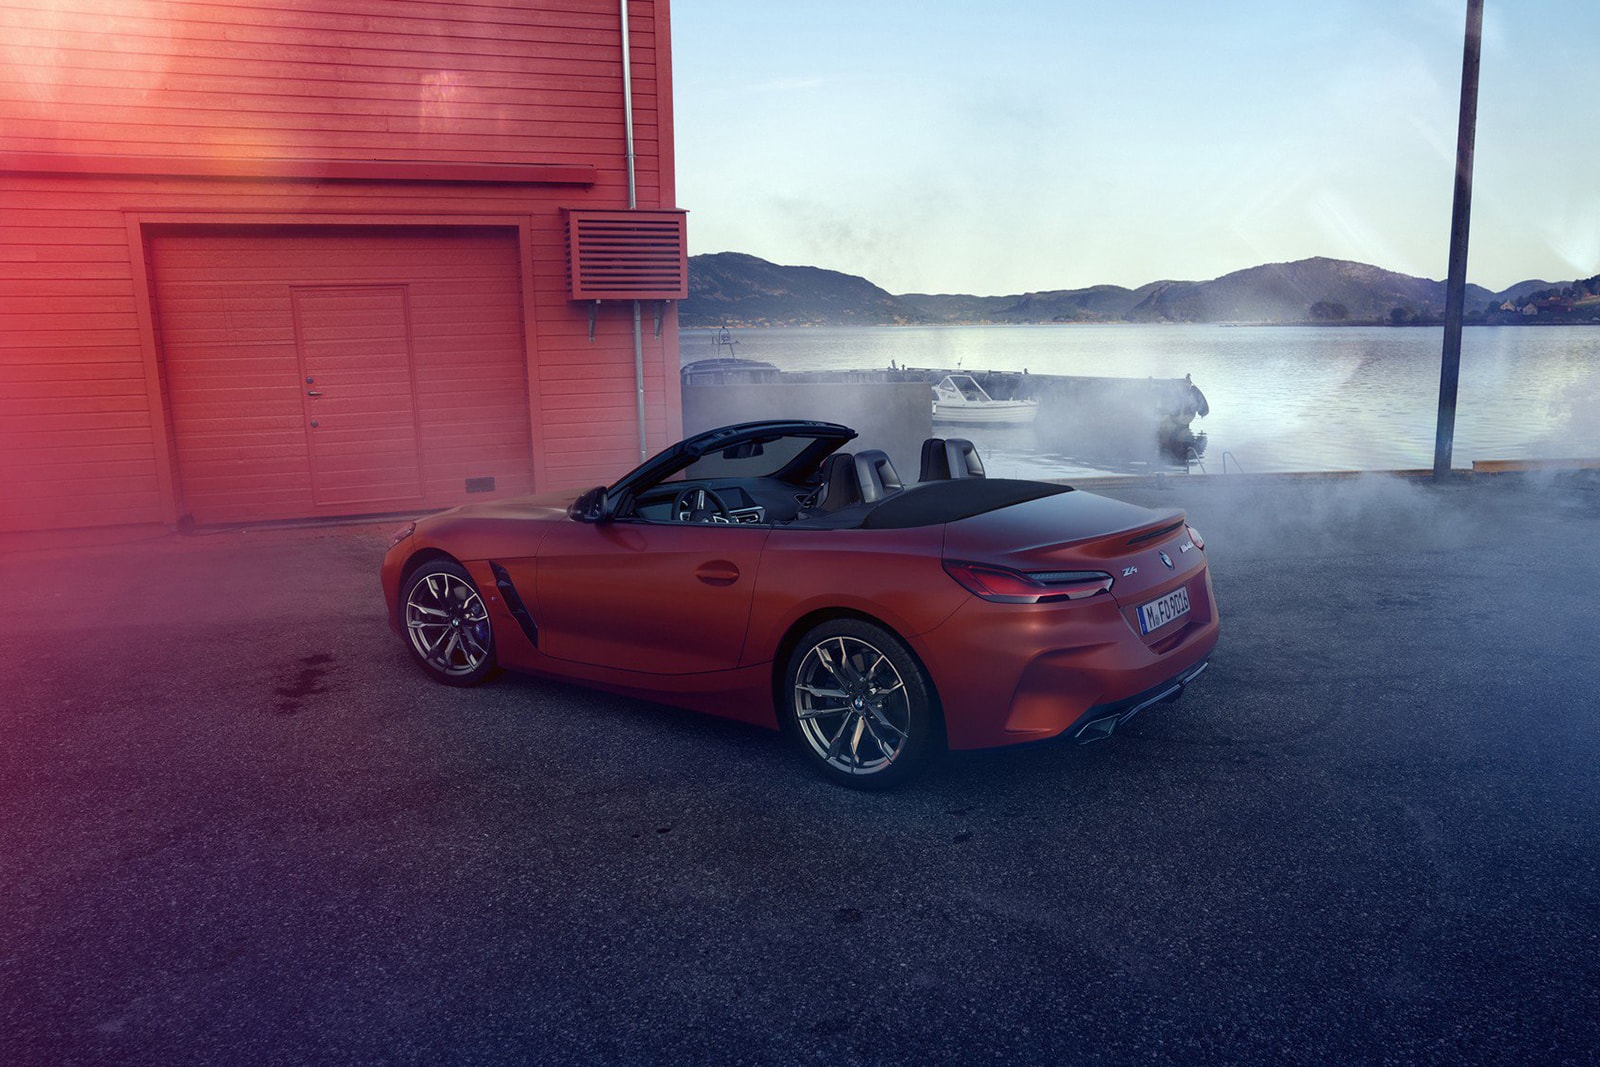 BMW 2019 Z4 M40i Car Details Pebble Beach Debut Available Automotive unveil debut first look official sportscar august 23 2018 full reveal images pictures